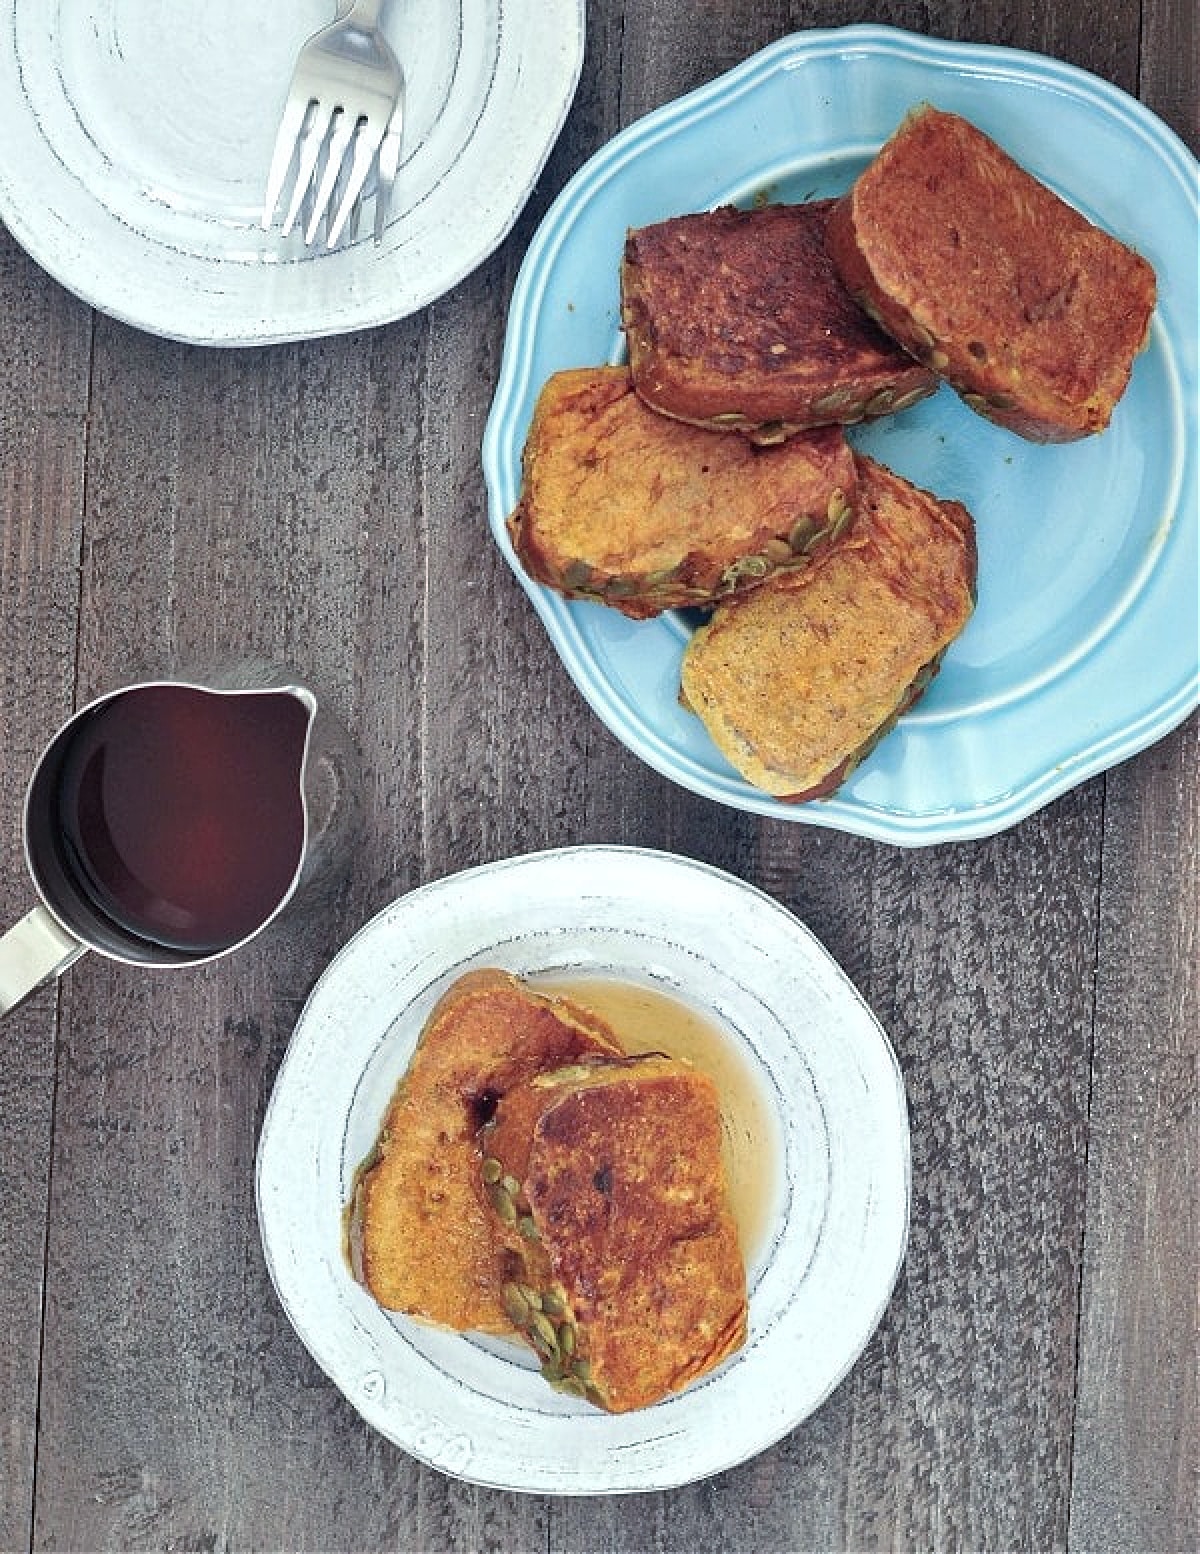 Overhead view of pumpkin bread French toast - a plate full of slices, one plate with two slices and syrup, extra plates and forks, and a silver pitcher of warm syrup.